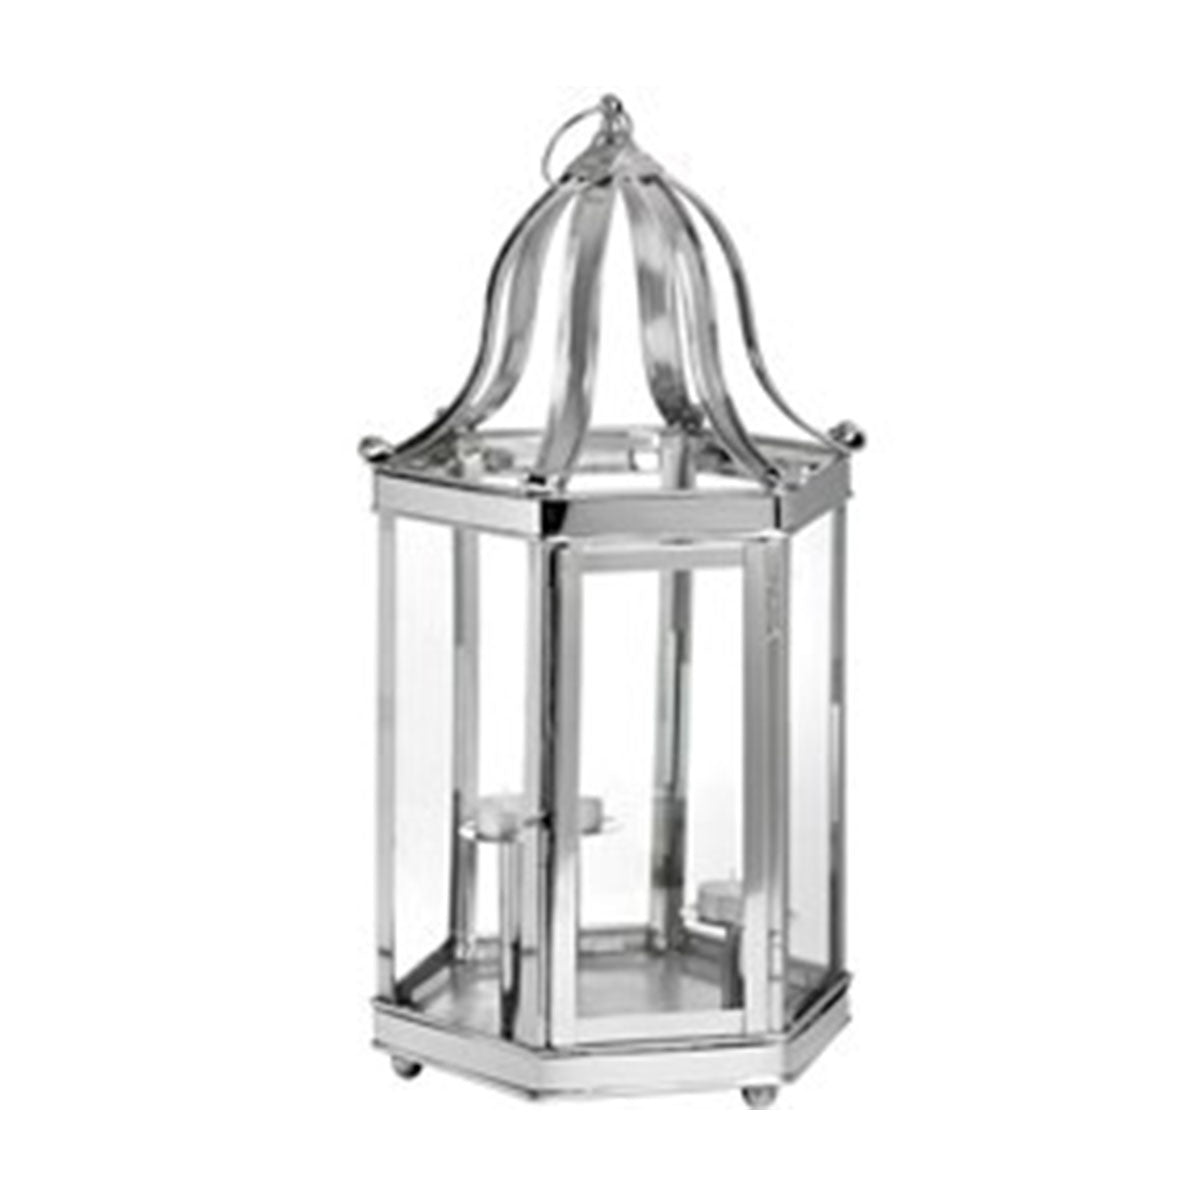 Decorative Lantern With 3 Candle Stands